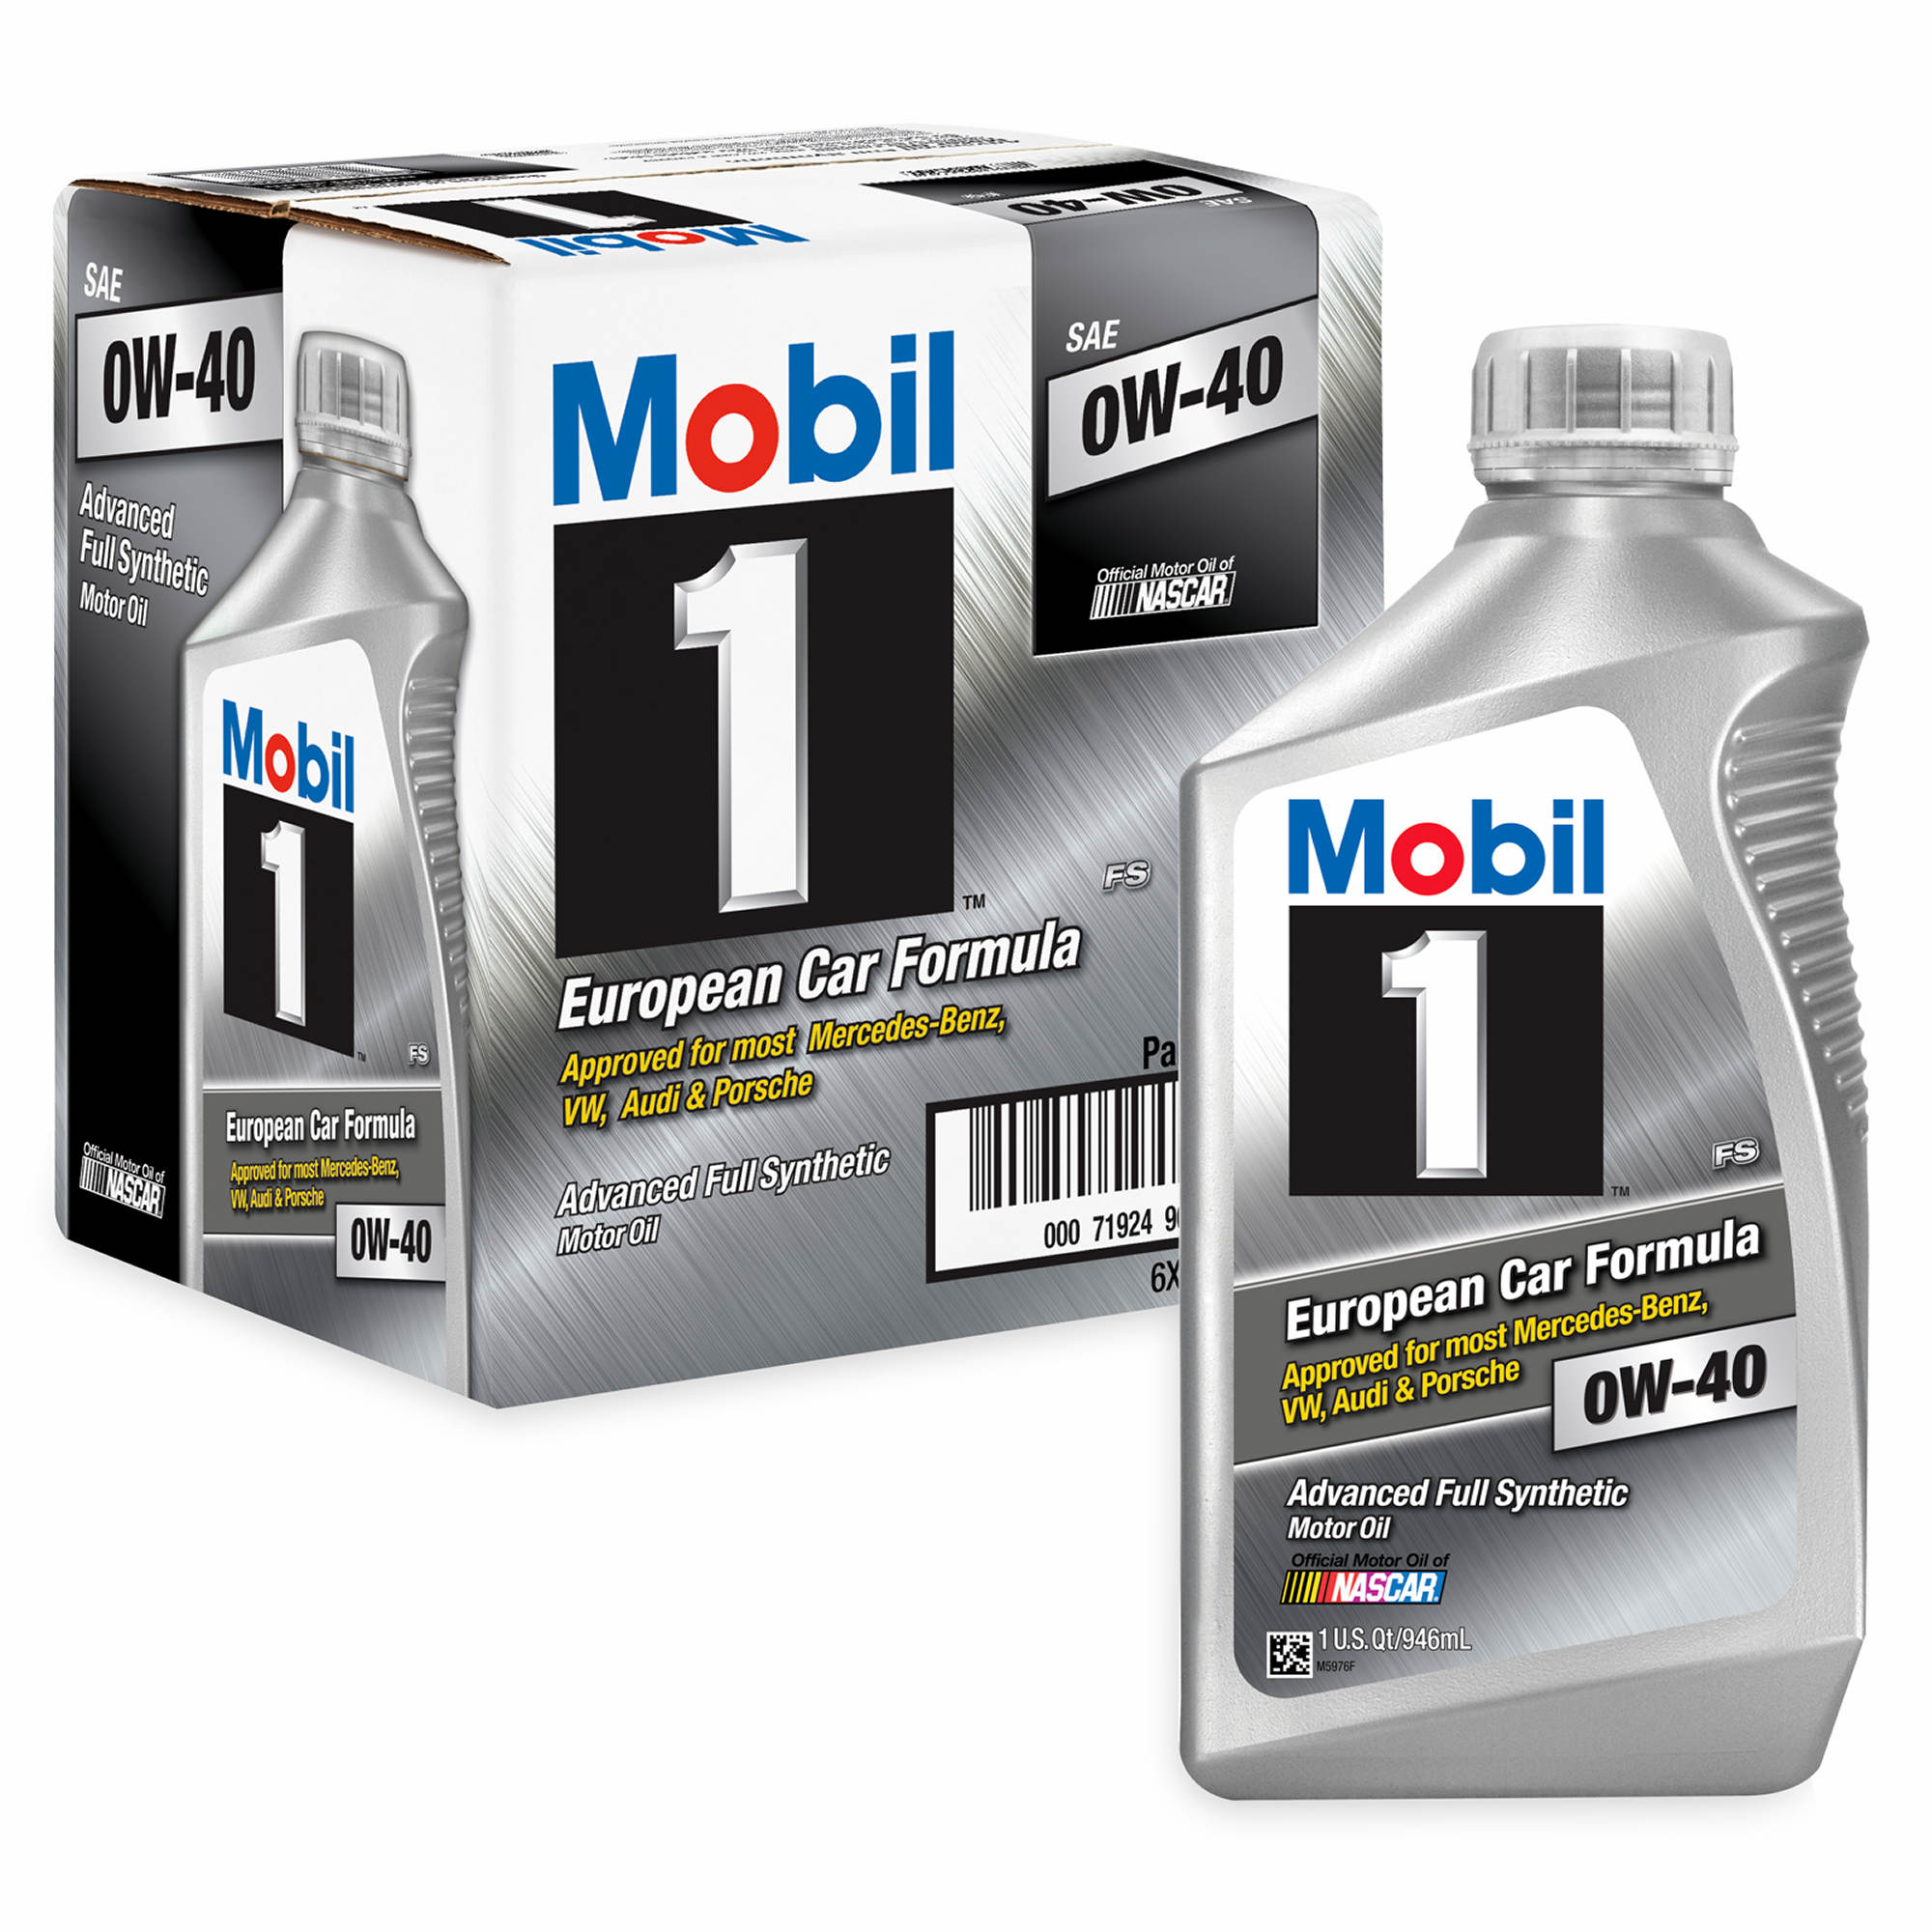 Масло мобил 0w20. 5w-30 mobil1 High Mileage. Mobil 1 Full Synthetic 0w40 Truck & SUV. 123875 Mobil 1 ESP Formula 0w-40*. Mobil 1 ESP 0w-30.